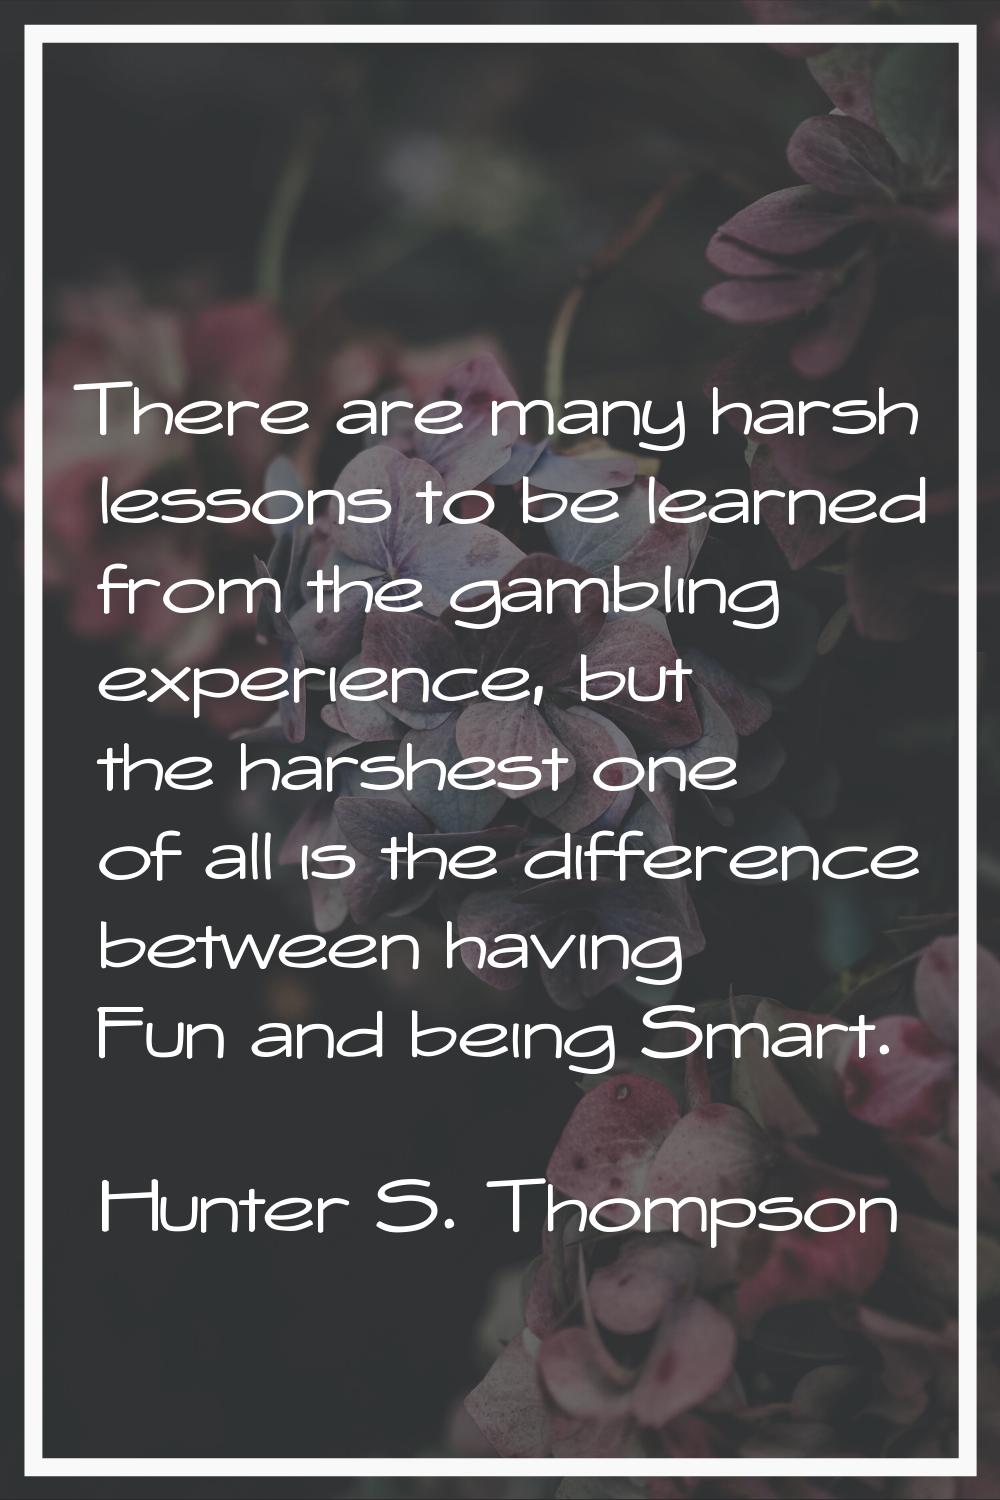 There are many harsh lessons to be learned from the gambling experience, but the harshest one of al